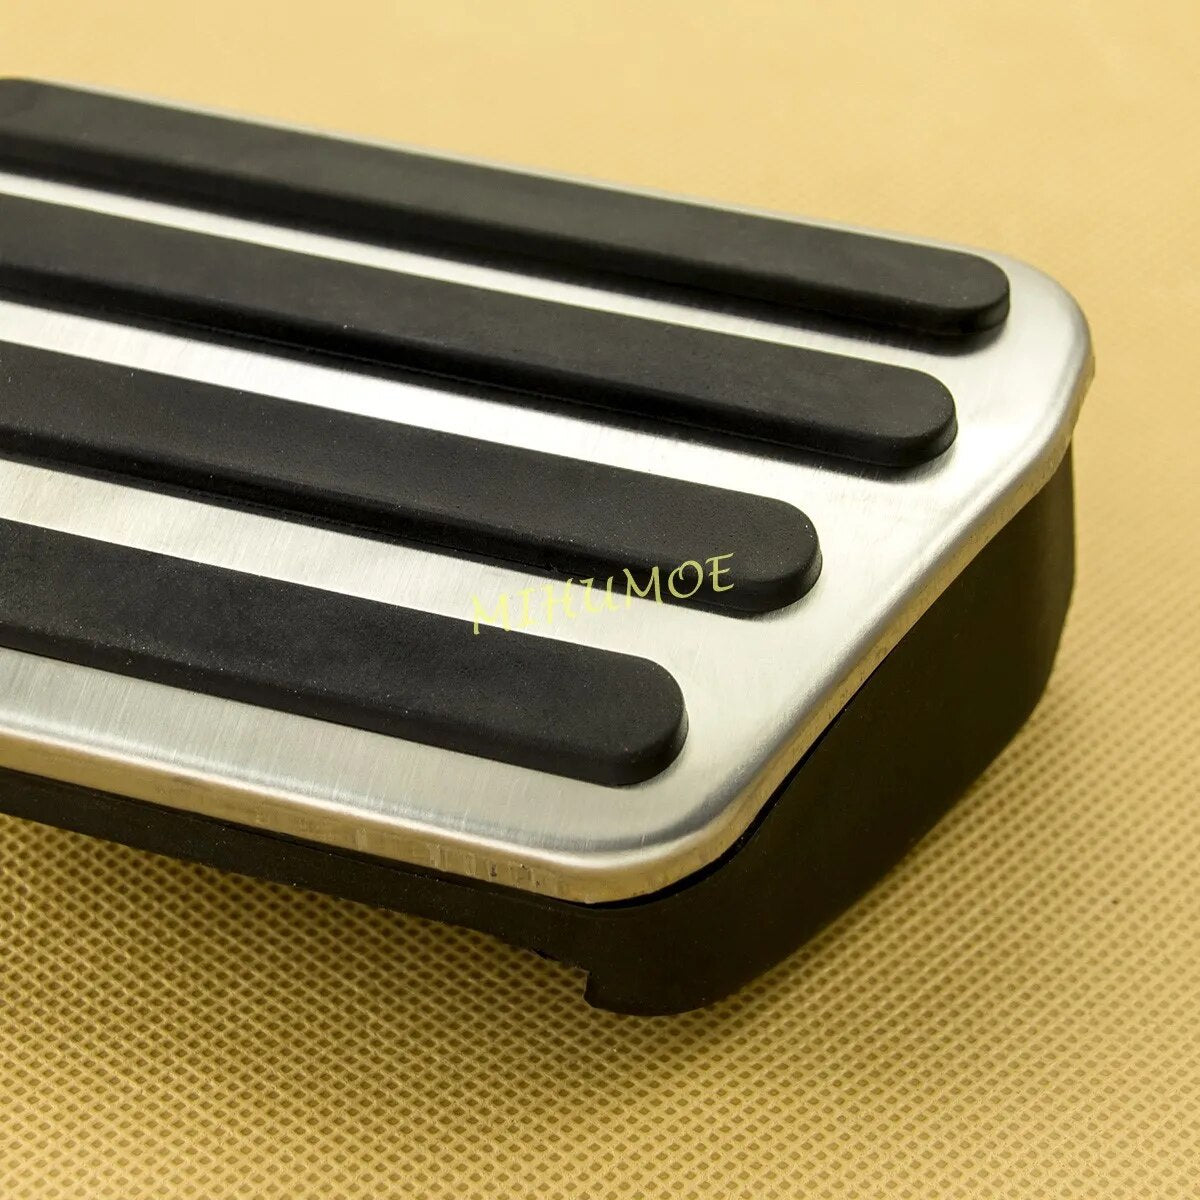 Stainless Steel Foot Gas Brake Accelerator Pedal Cover For 2003-2012 Range Rover L322